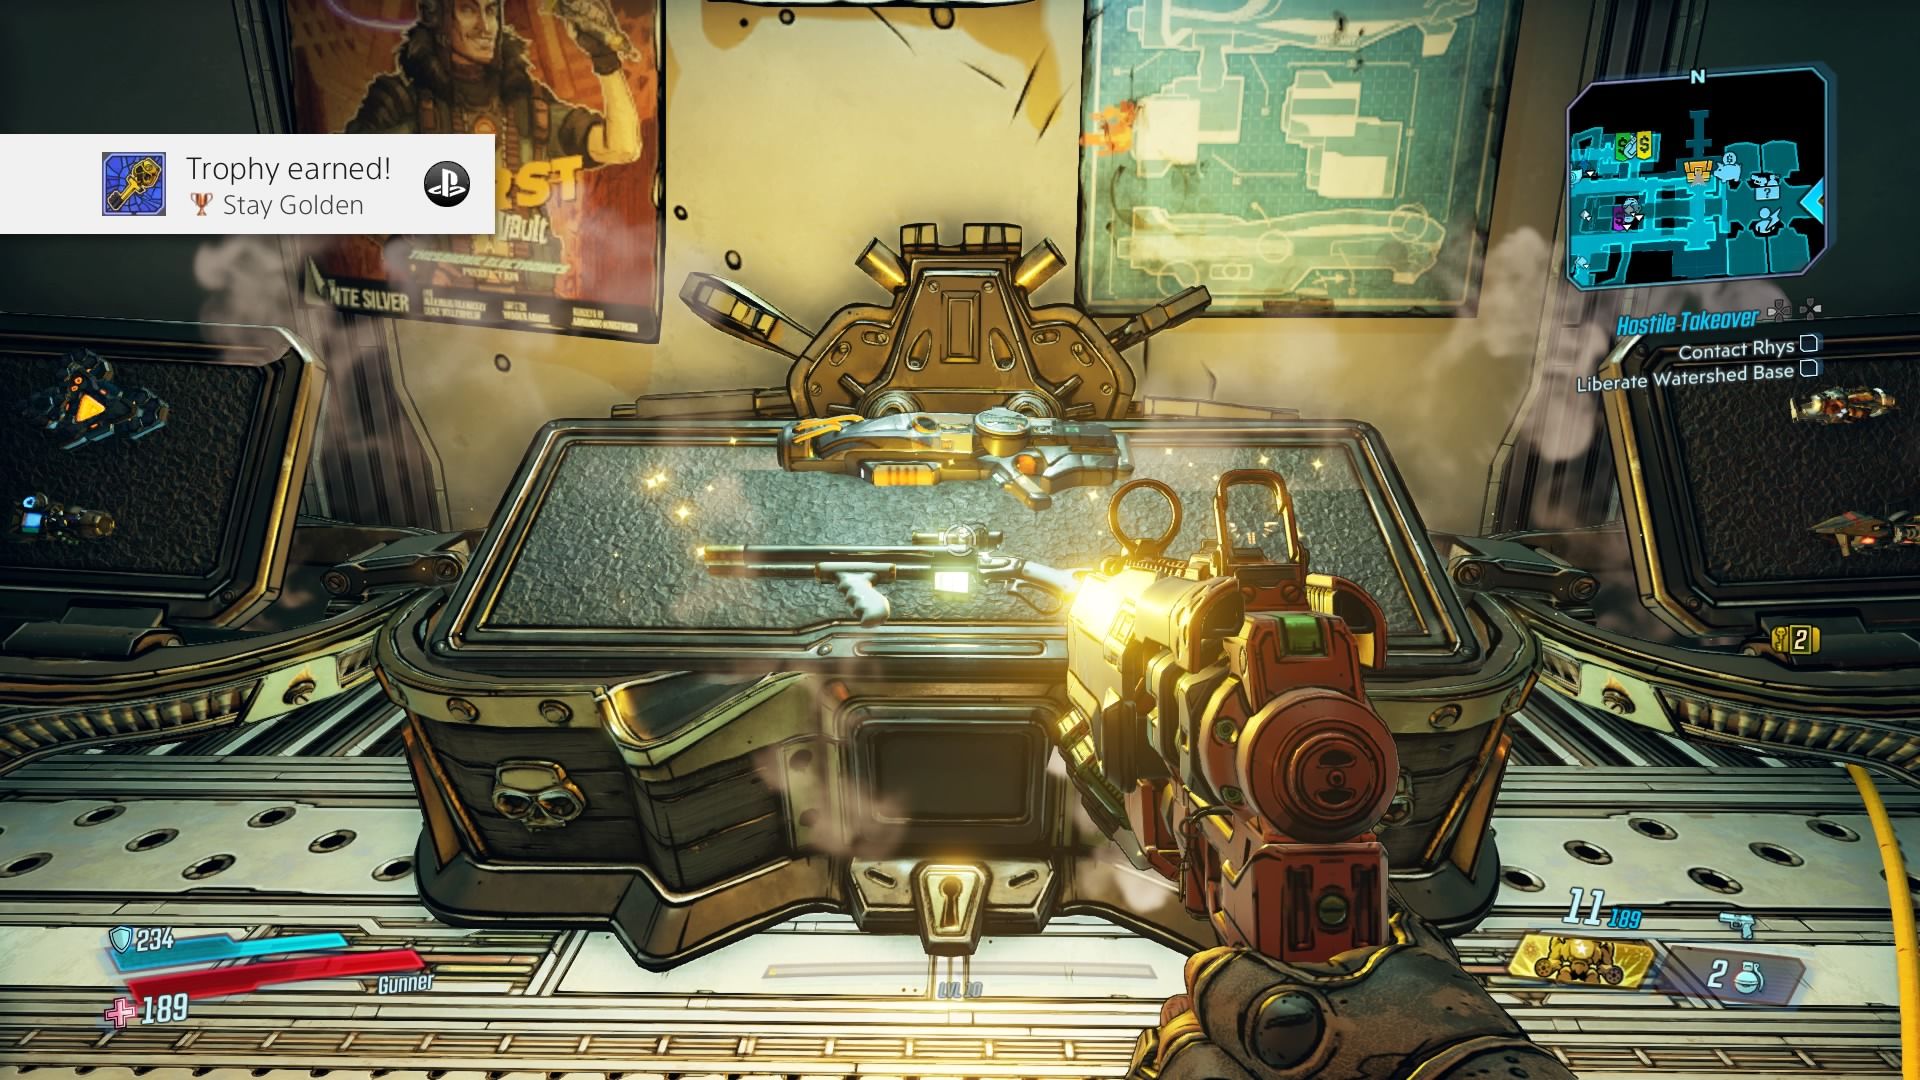 Every Borderlands 3 Shift Code you need to unlock the Golden Chest